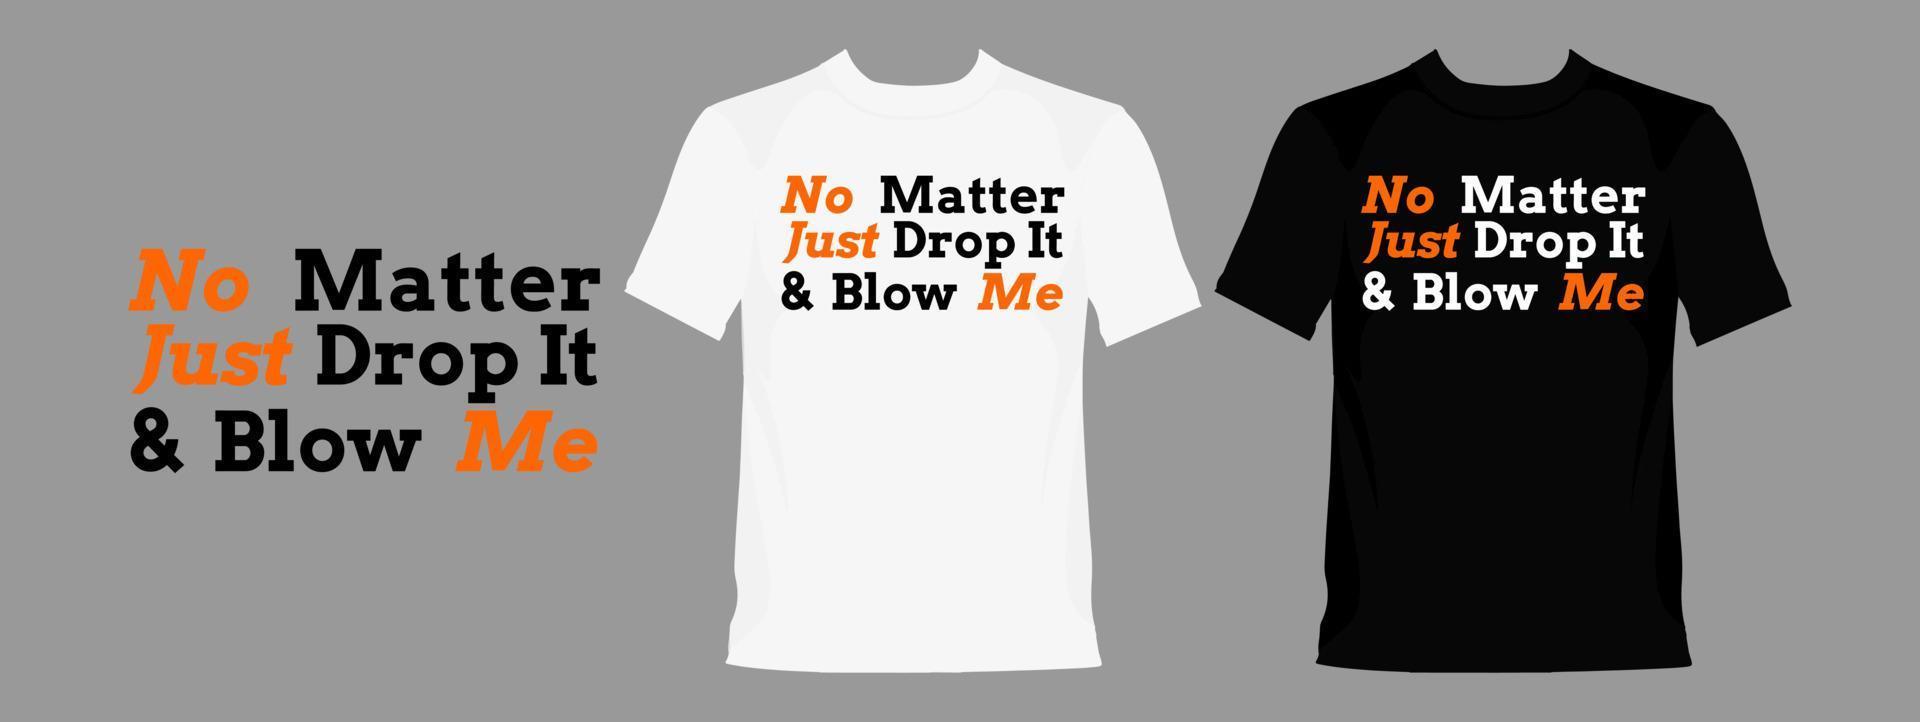 No Matter Just Drop It and Blow Me typography graphic design, for t-shirt prints, vector illustration